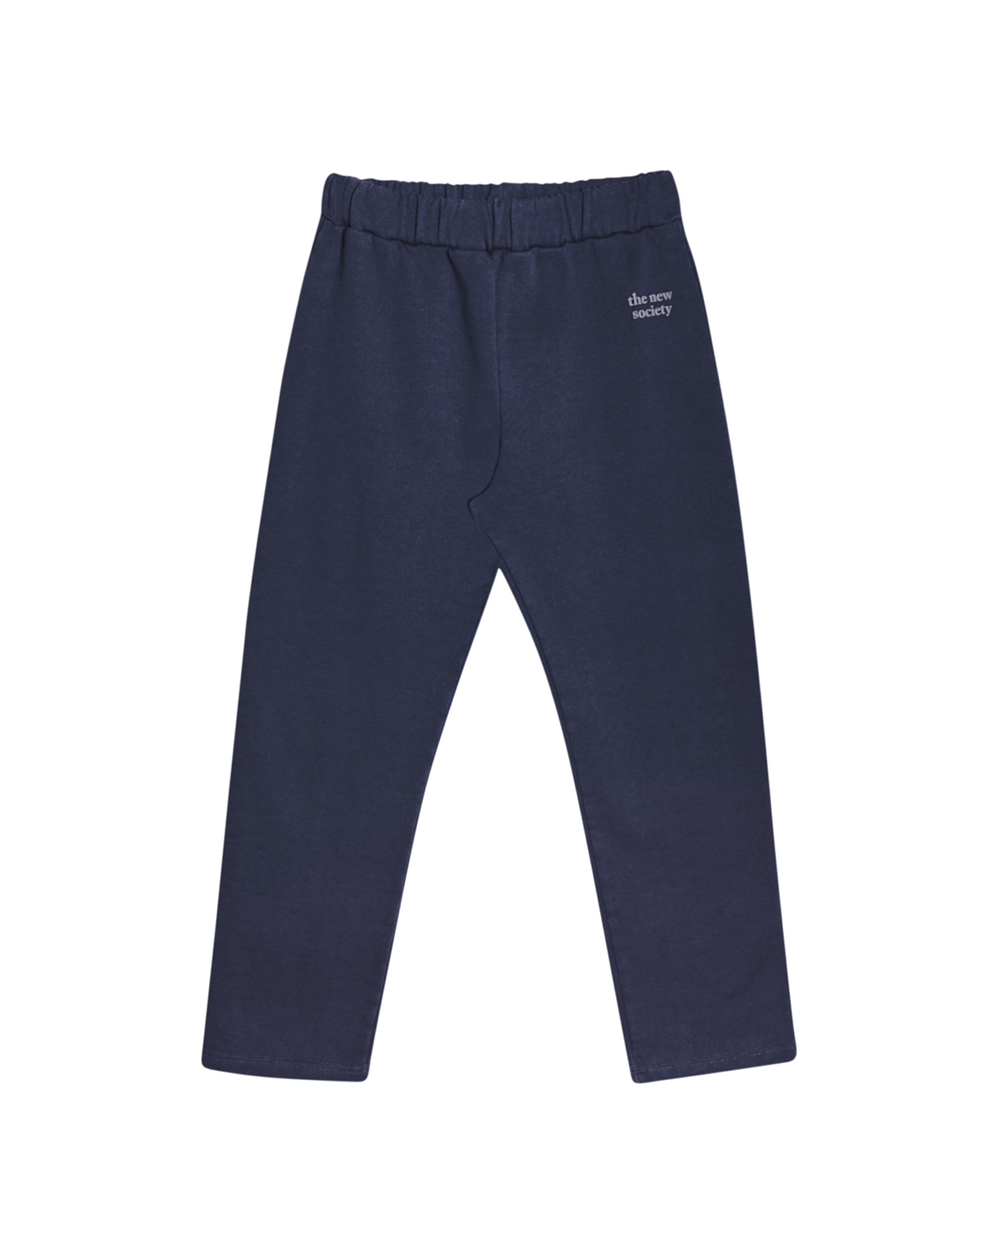 [ THE NEW SOCIETY ] Flock Organic Cotton Logo Joggers / Navy blue [6Y, 8Y]